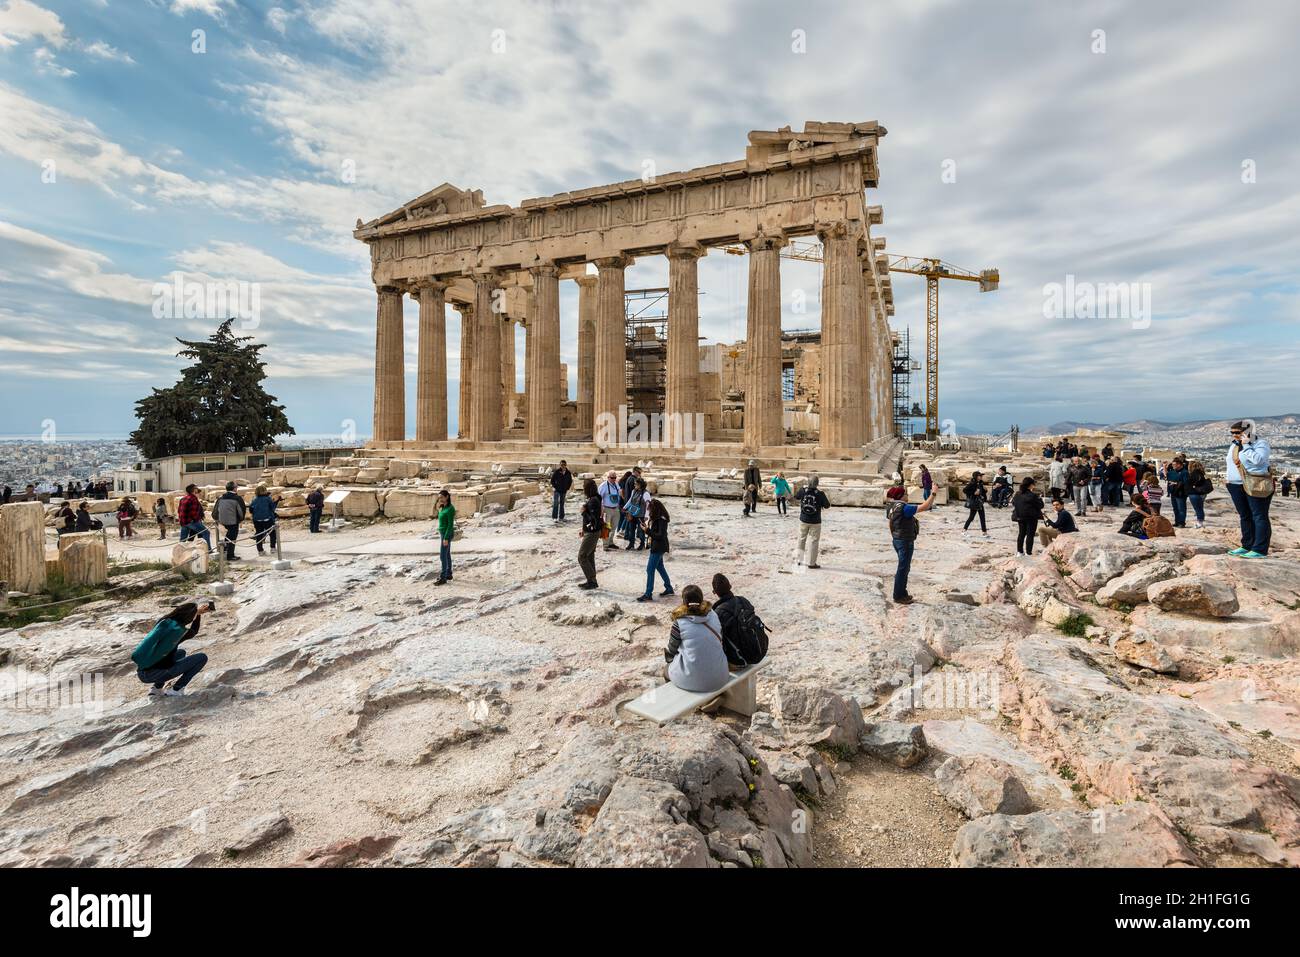 Athens, Greece - November 1, 2017: Many tourists visiting ancient temple Parthenon on Acropolis. Acropolis of Athens is an ancient citadel located on Stock Photo